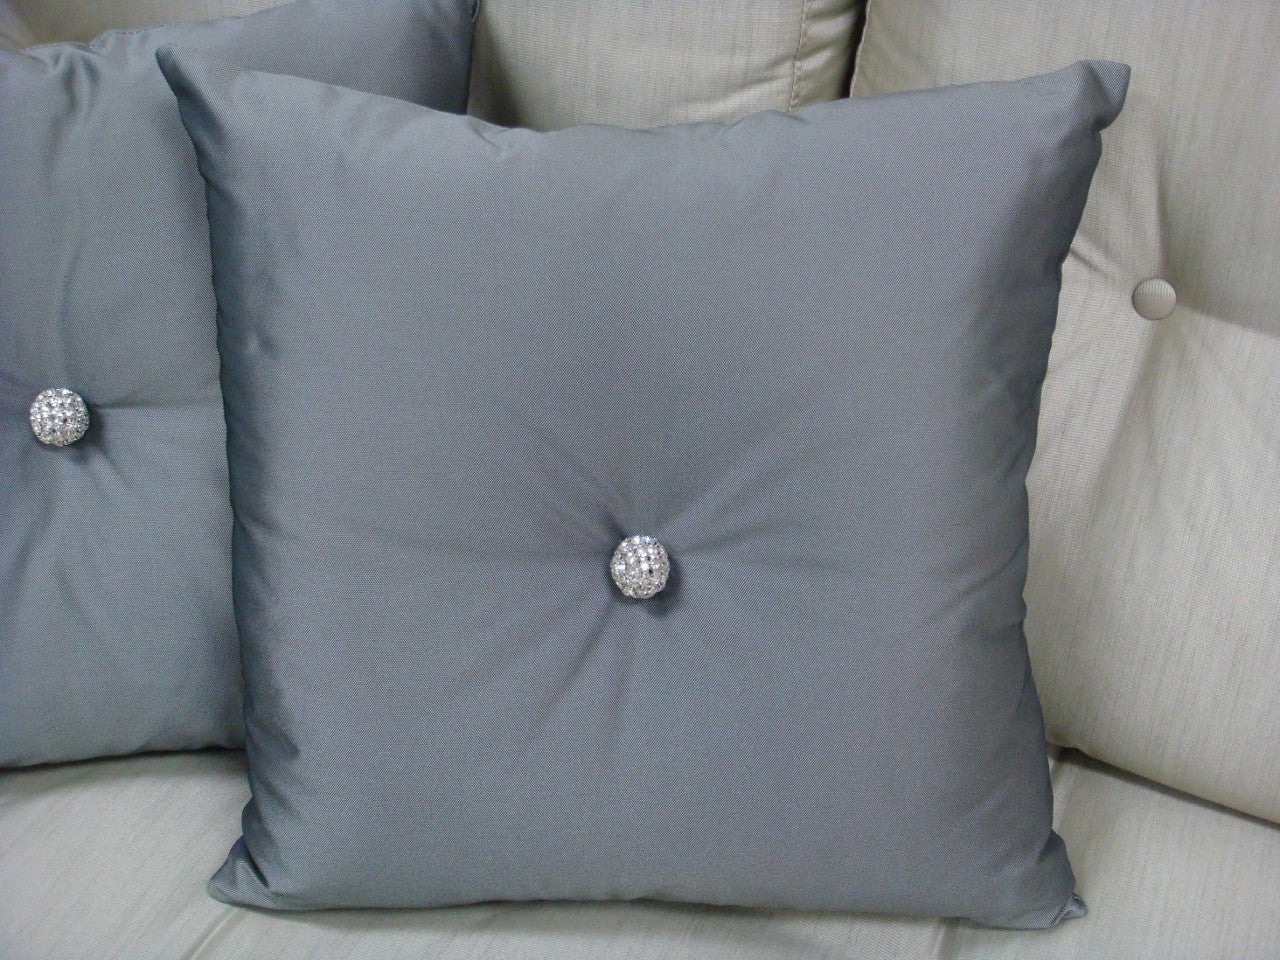 Carnaby Street Throw Pillow, Bling Grey/silver